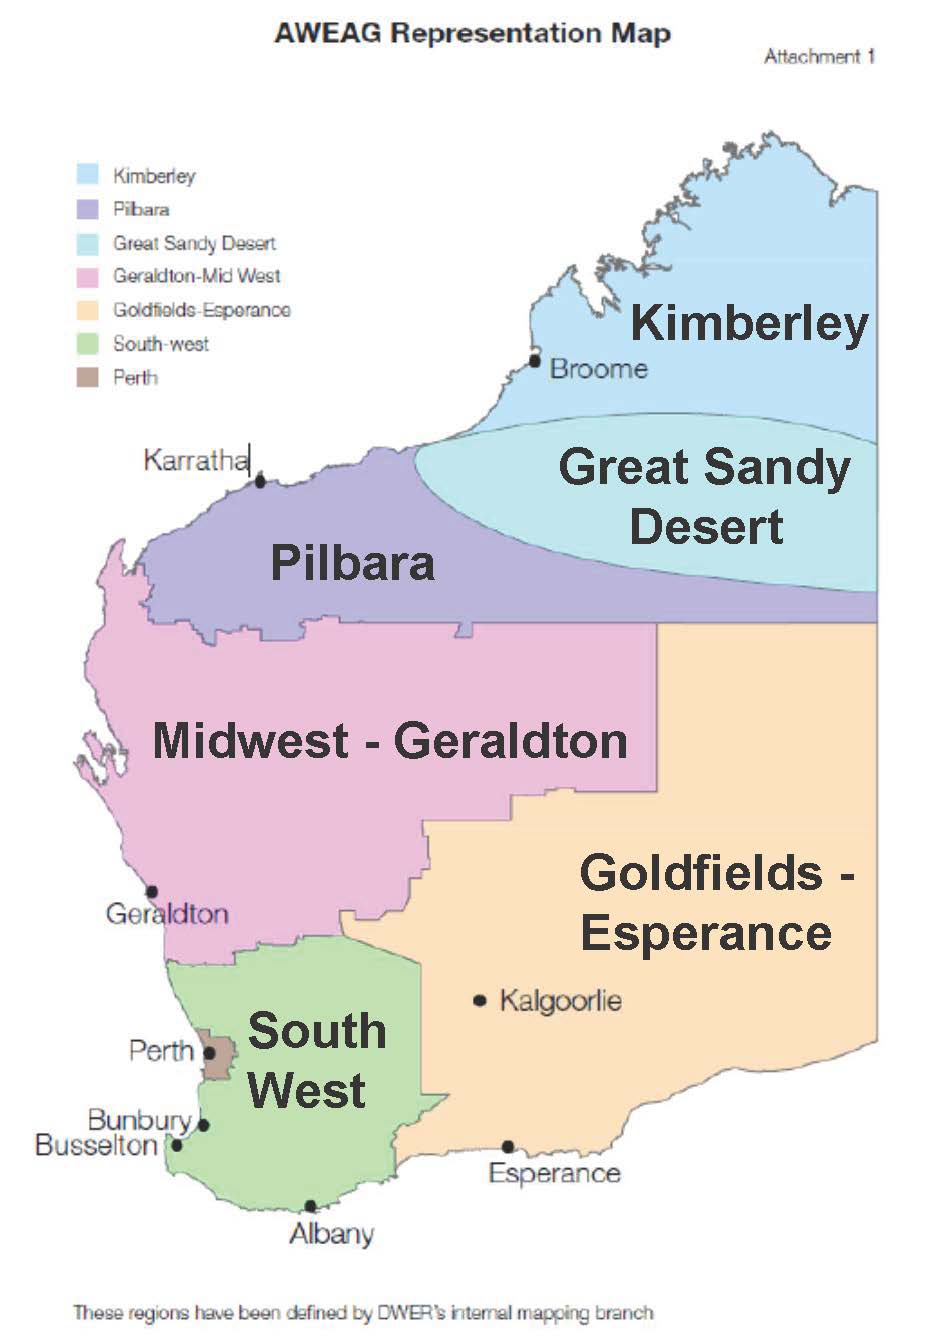 AWEAG Representation Map outlining the colourcoded regions within Western Australia